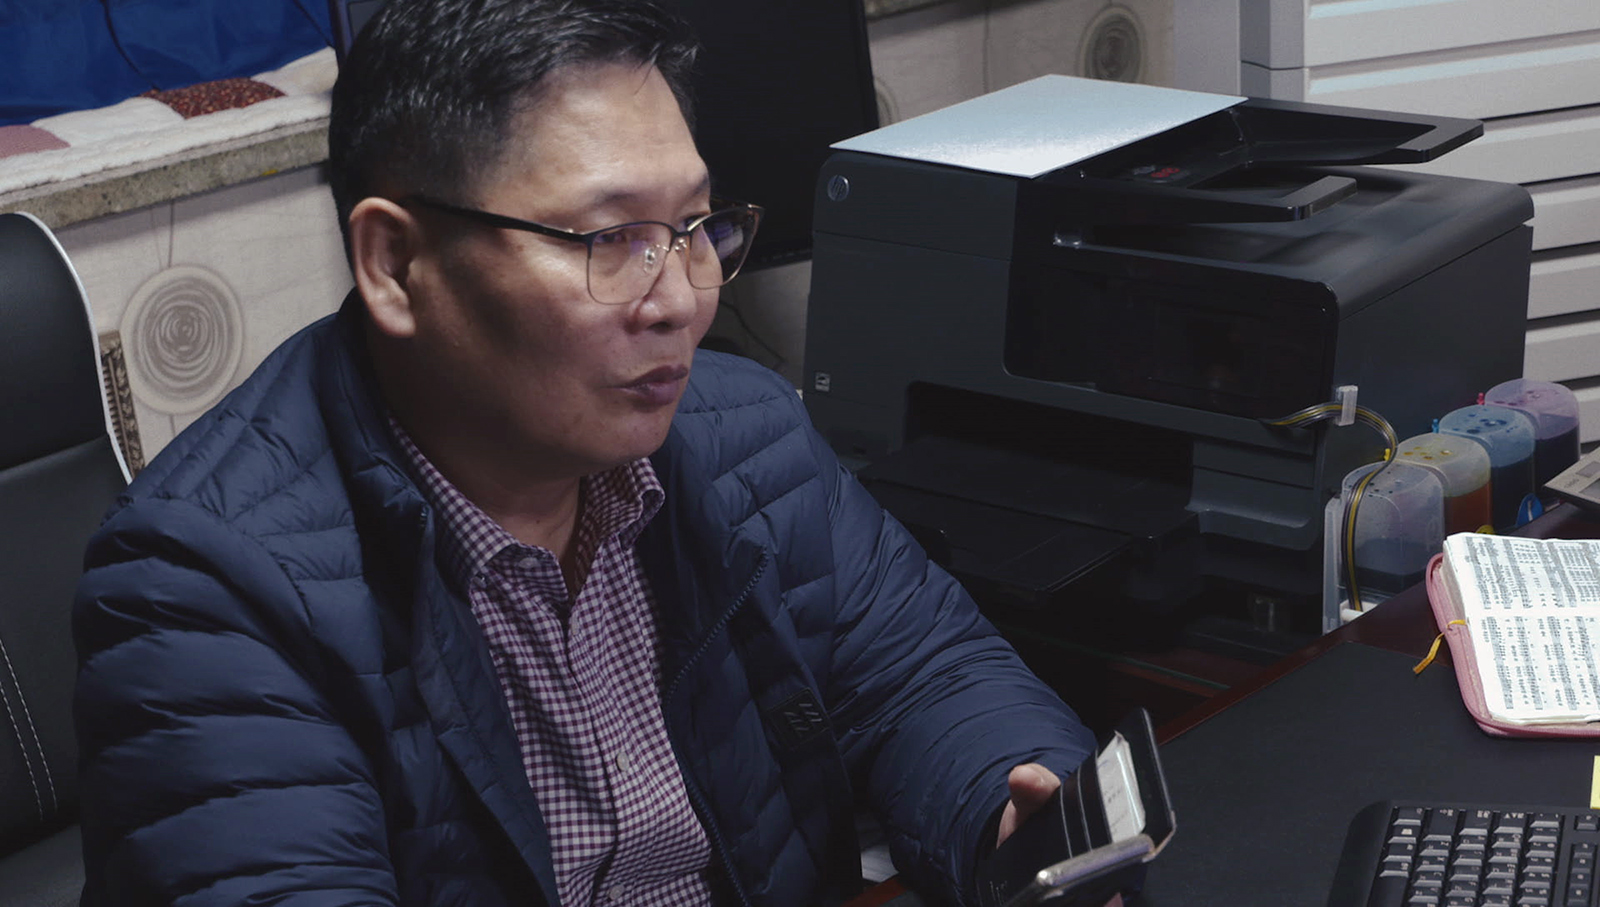 Pastor Seungeun Kim in a scene from the documentary “Beyond Utopia." (Photo courtesy Beyond Utopia)